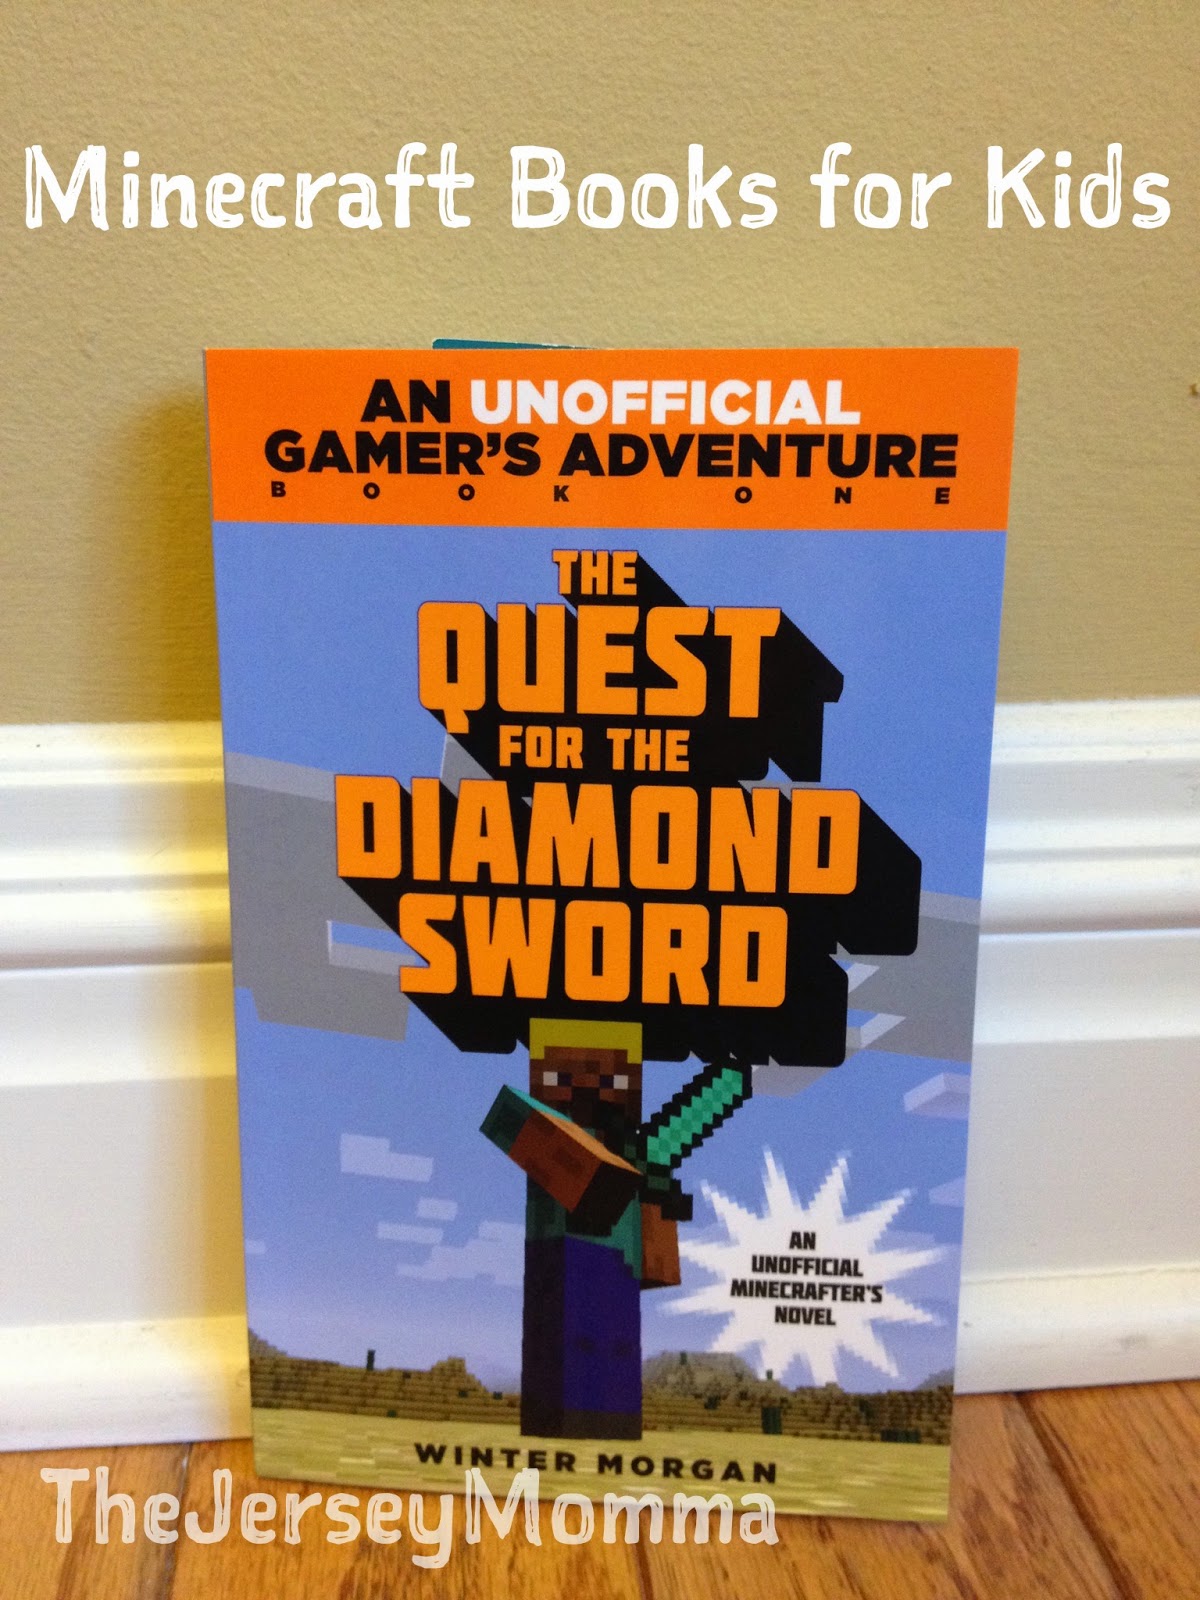 Minecraft Books for Kids Inspiring Reluctant Readers The Jersey Momma